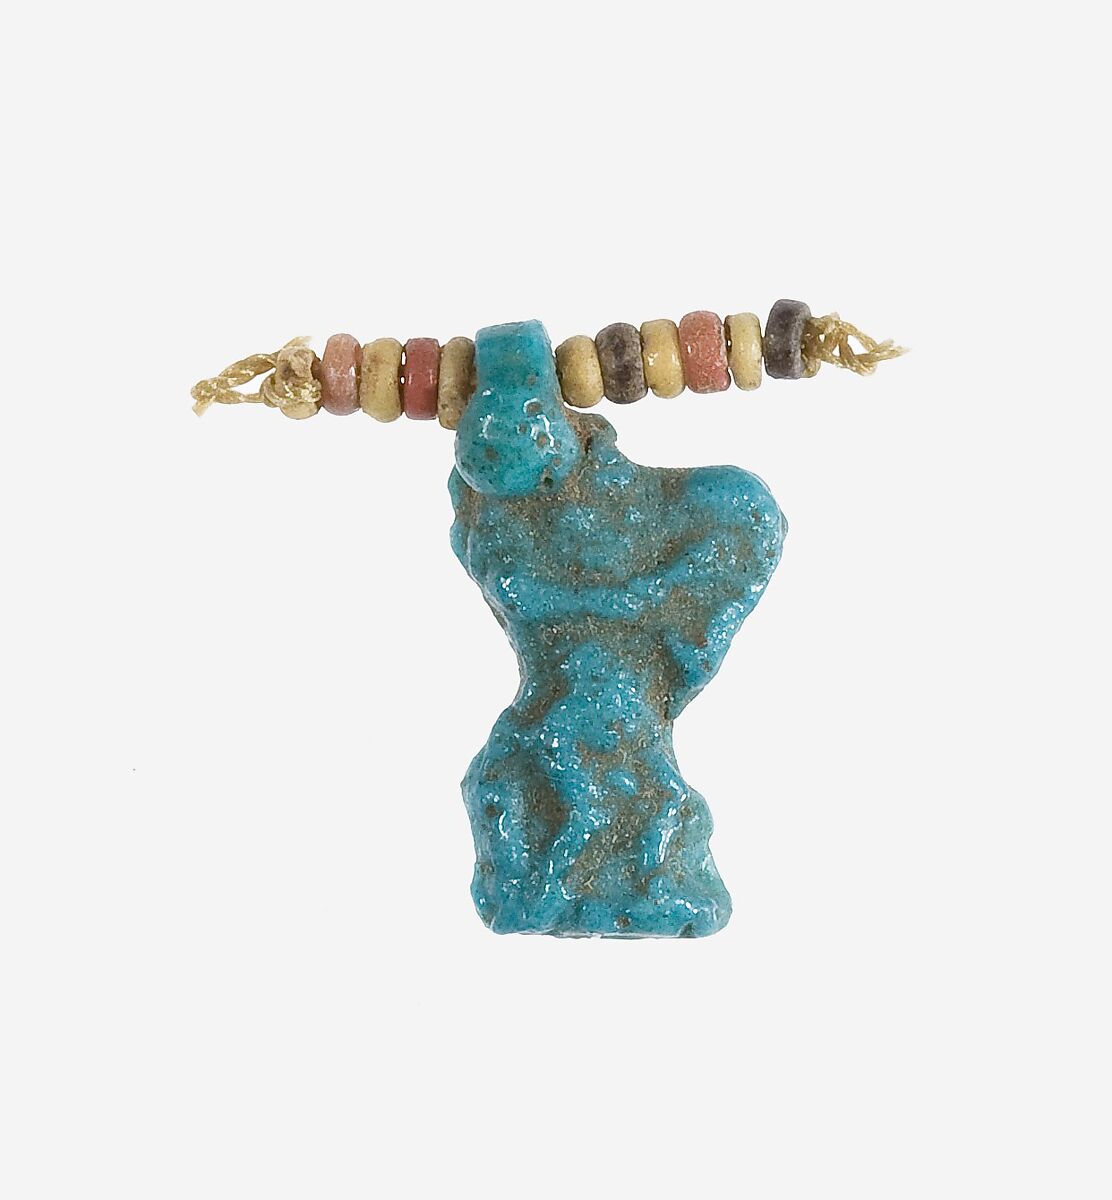 Amulet of Bes with a Tambourine, Faience 